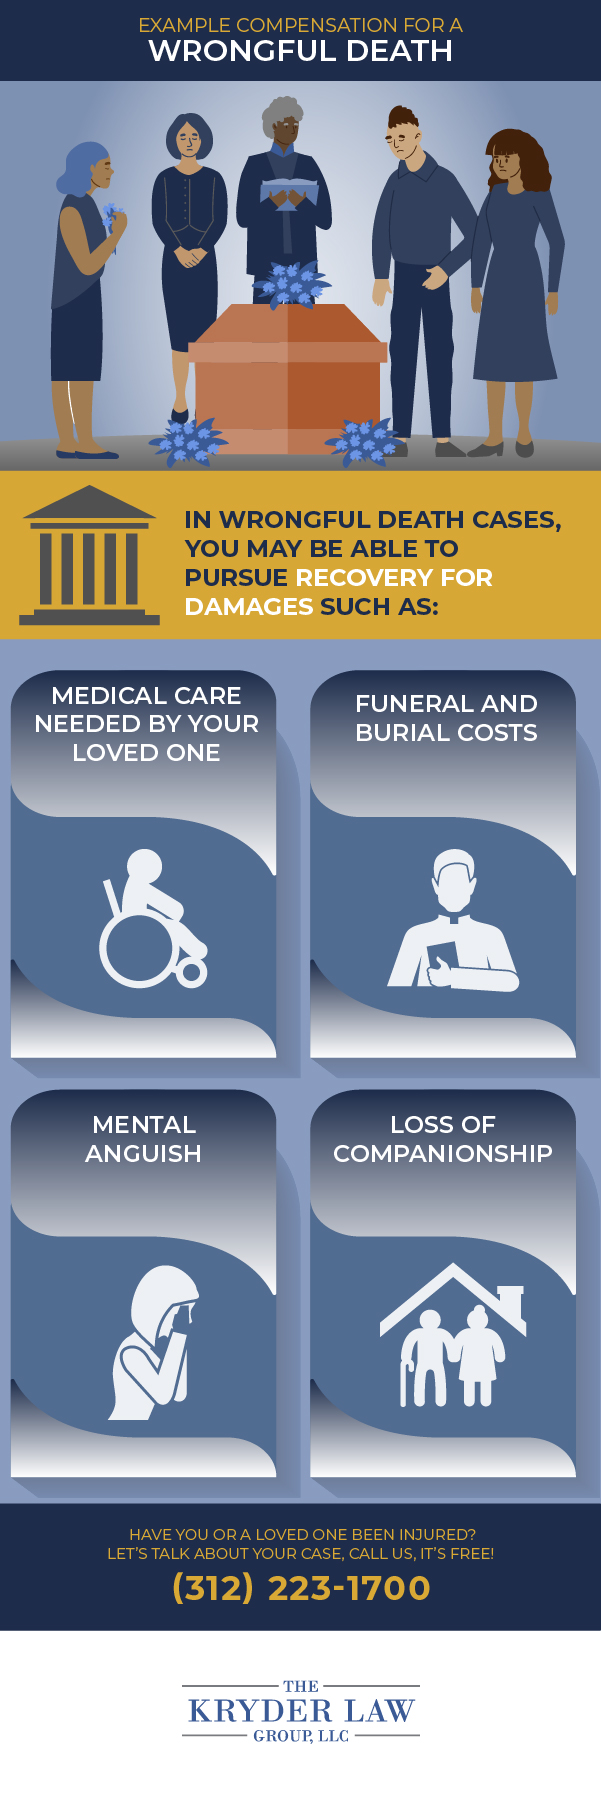 Example Compensation For A Wrongful Death